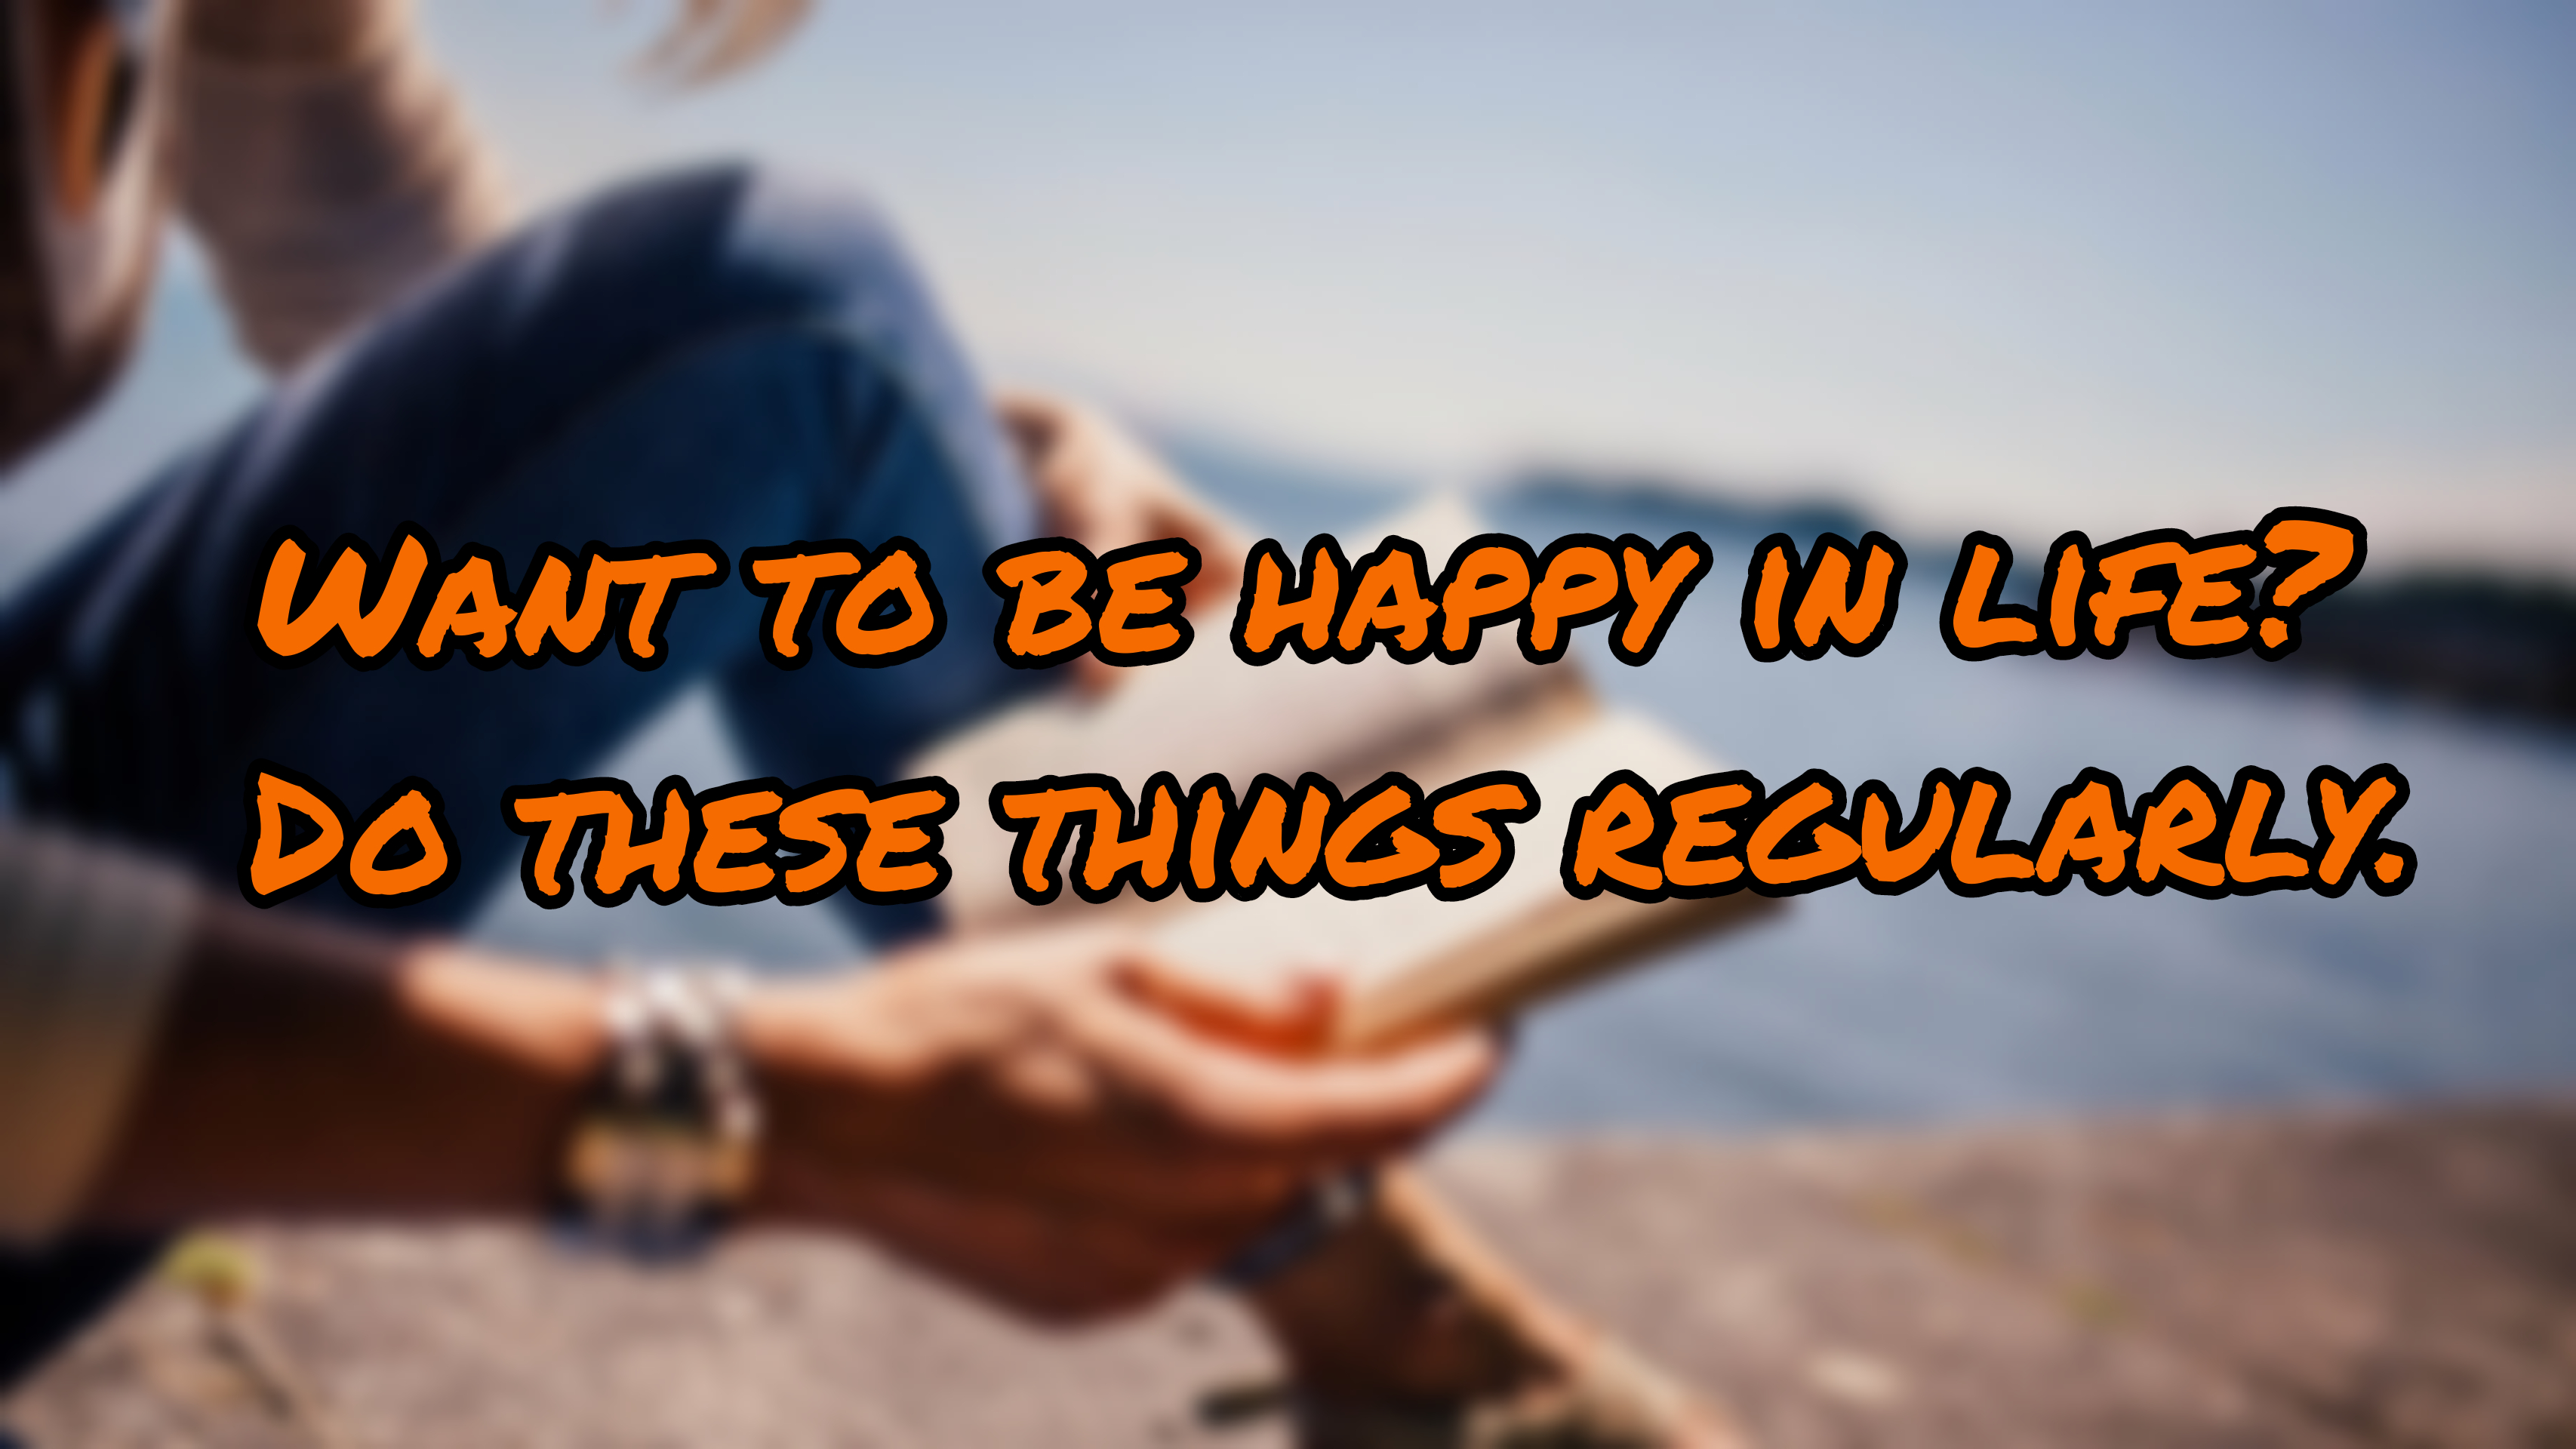 Want to be happy in life? Do these things regularly.